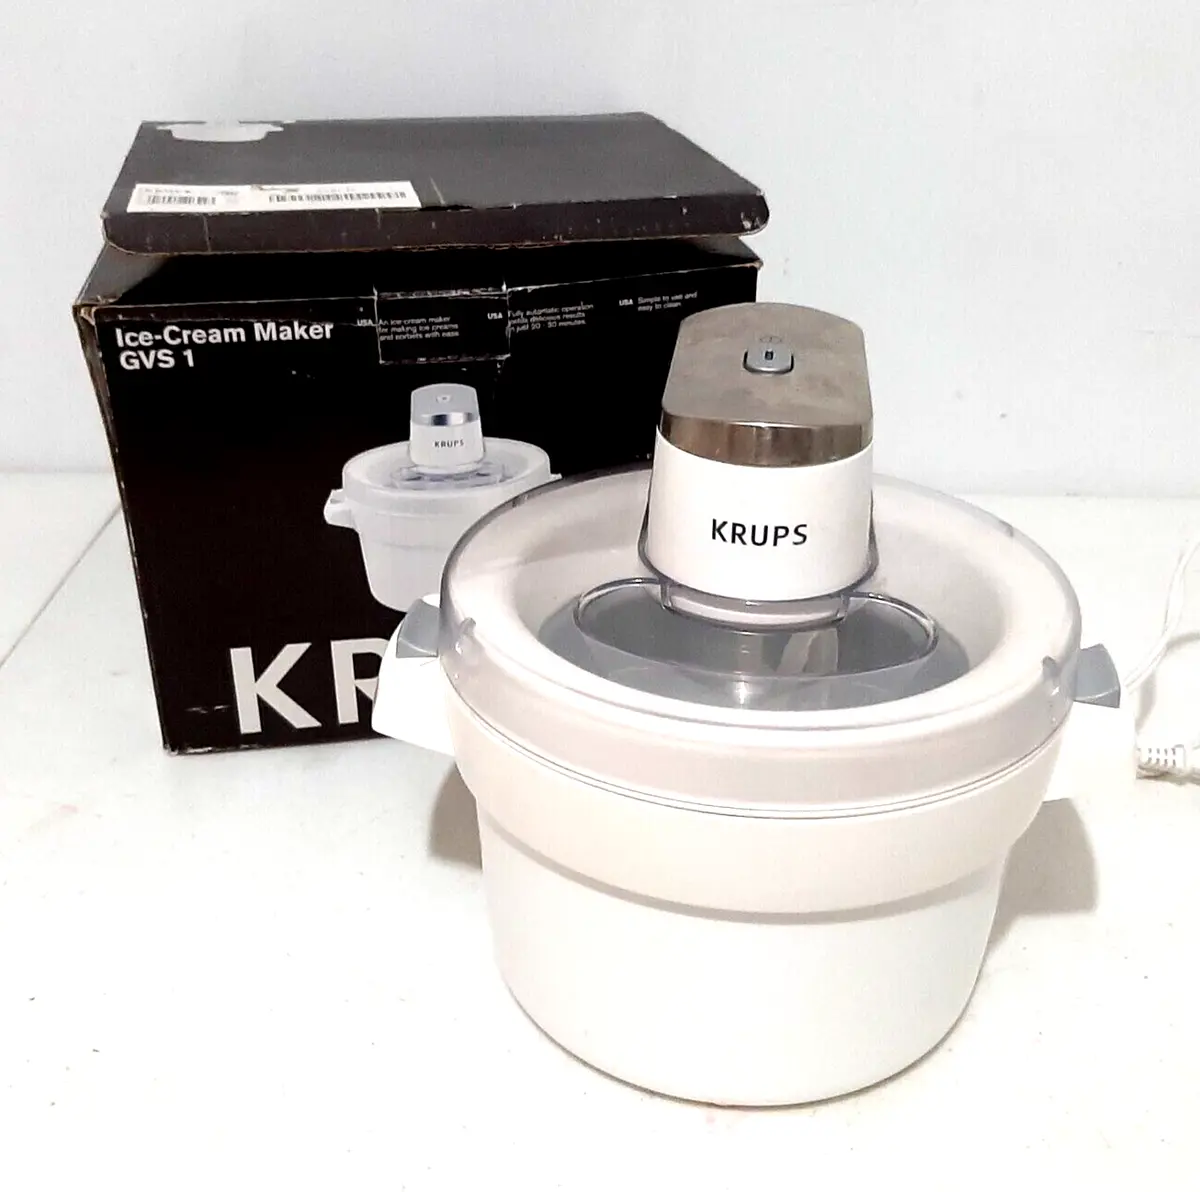 what-is-the-liquid-inside-a-krups-ice-cream-maker